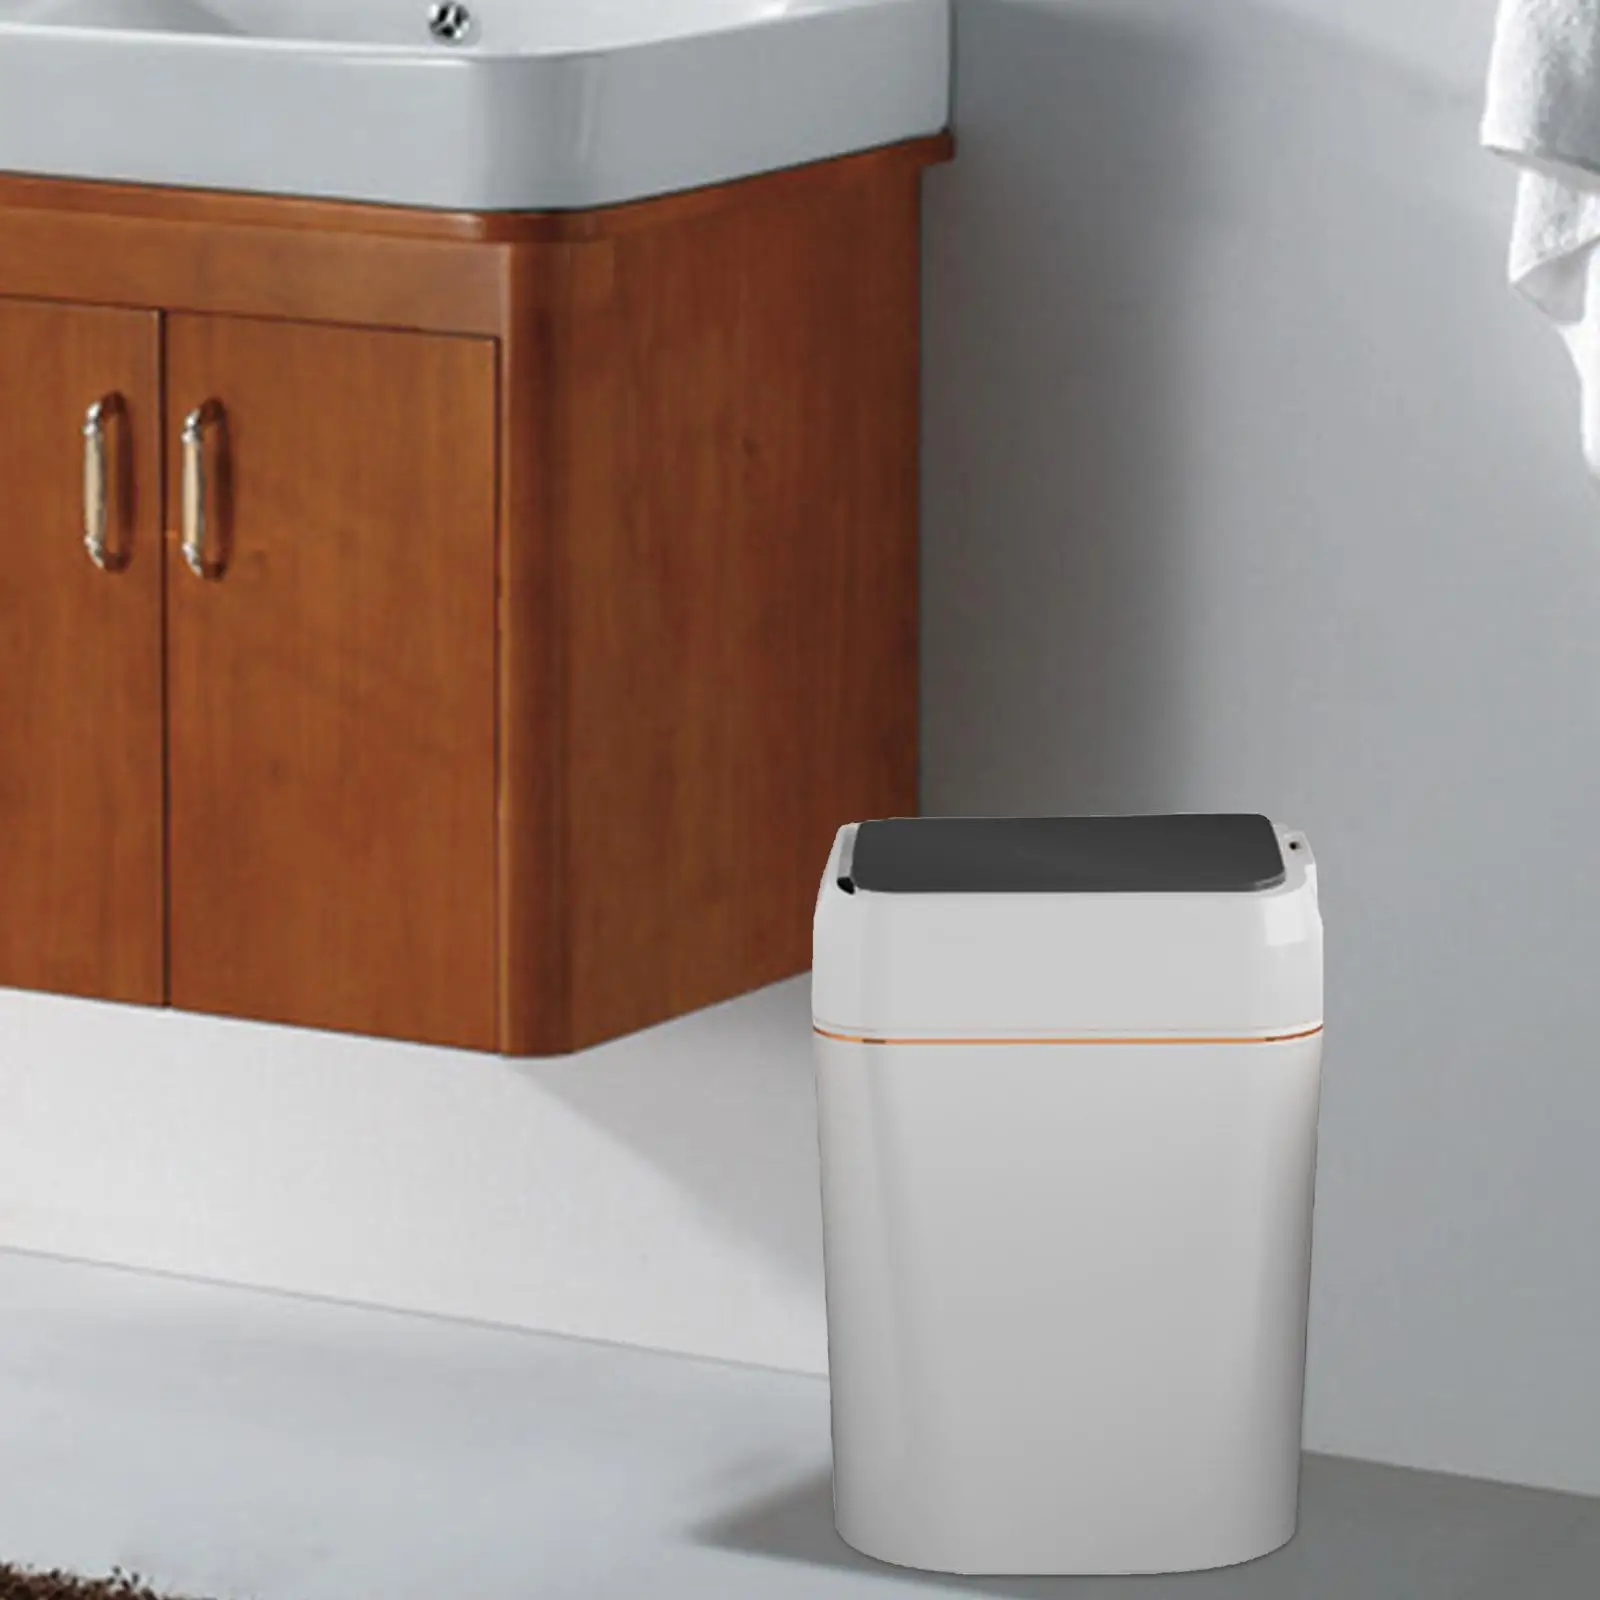 Touchless Trash Can Portable with Lid Rechargeable Bathroom Trash Cans with Lids for Office Living Room Outdoor Bathroom